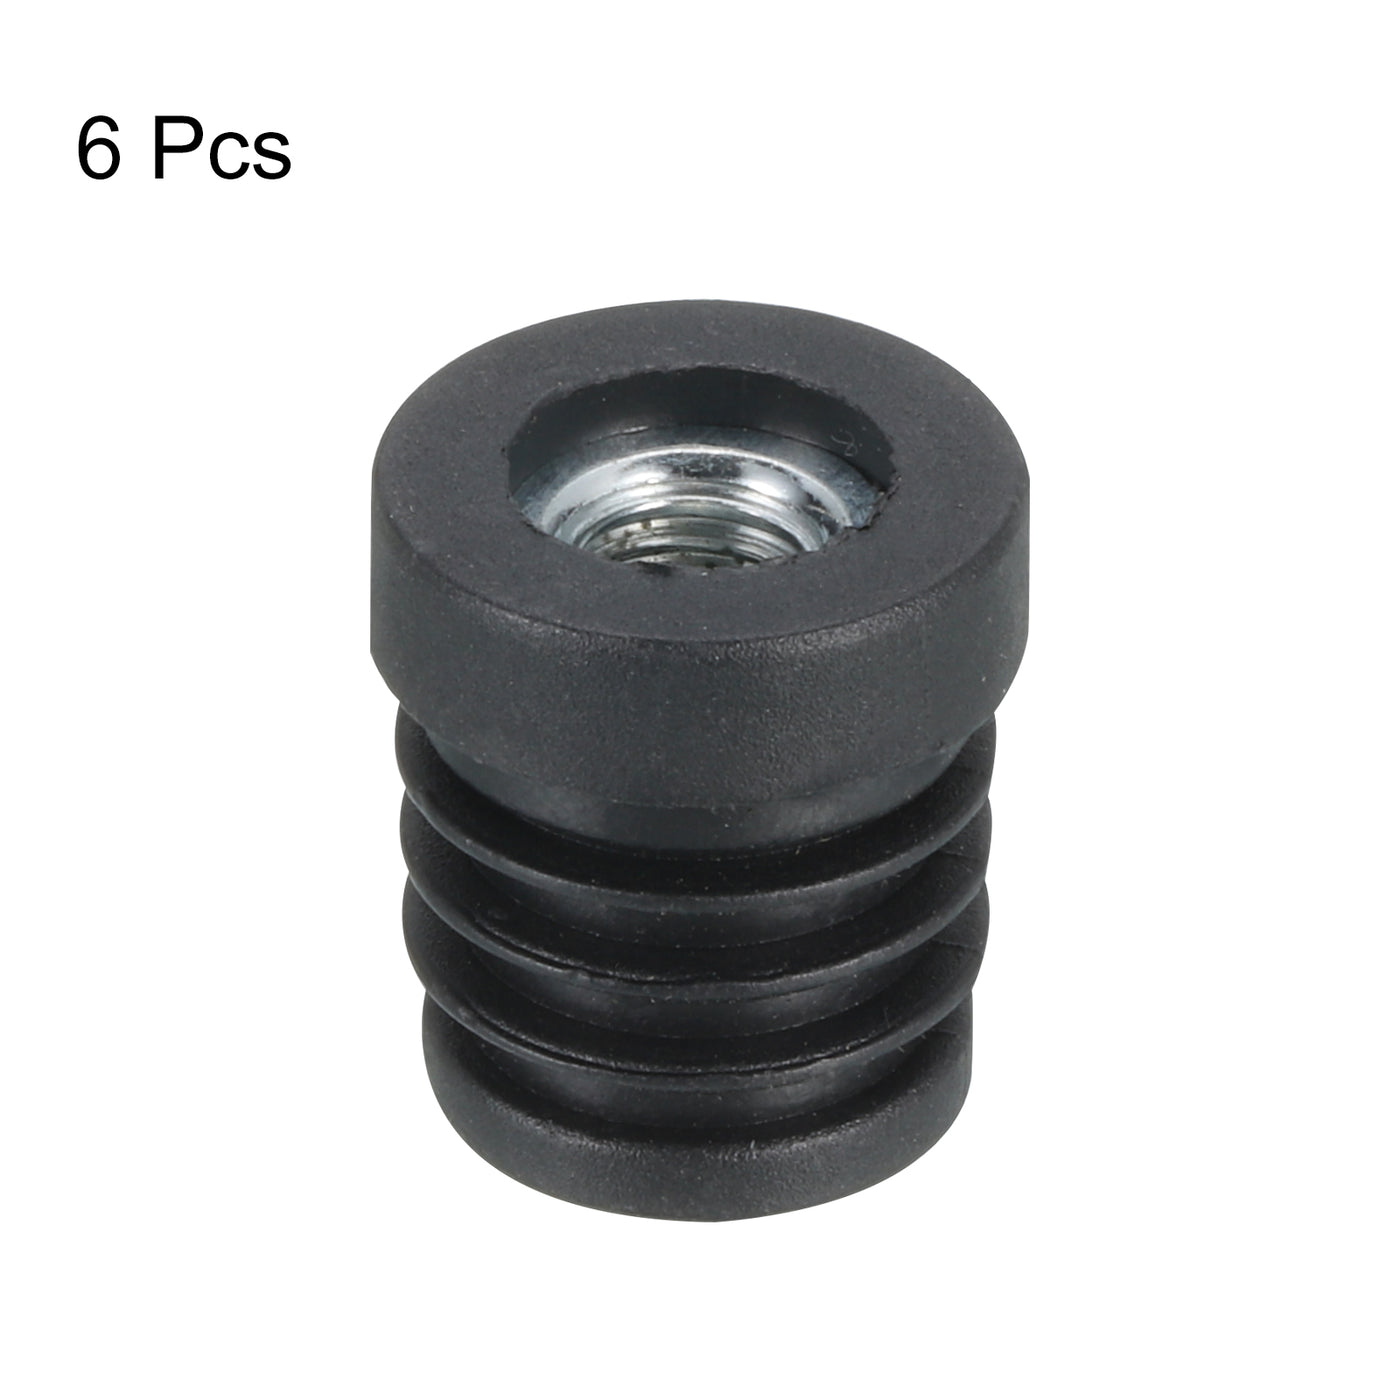 uxcell Uxcell 6Pcs Caster Insert with Thread, 19mm/0.75" M8 Thread for Furniture